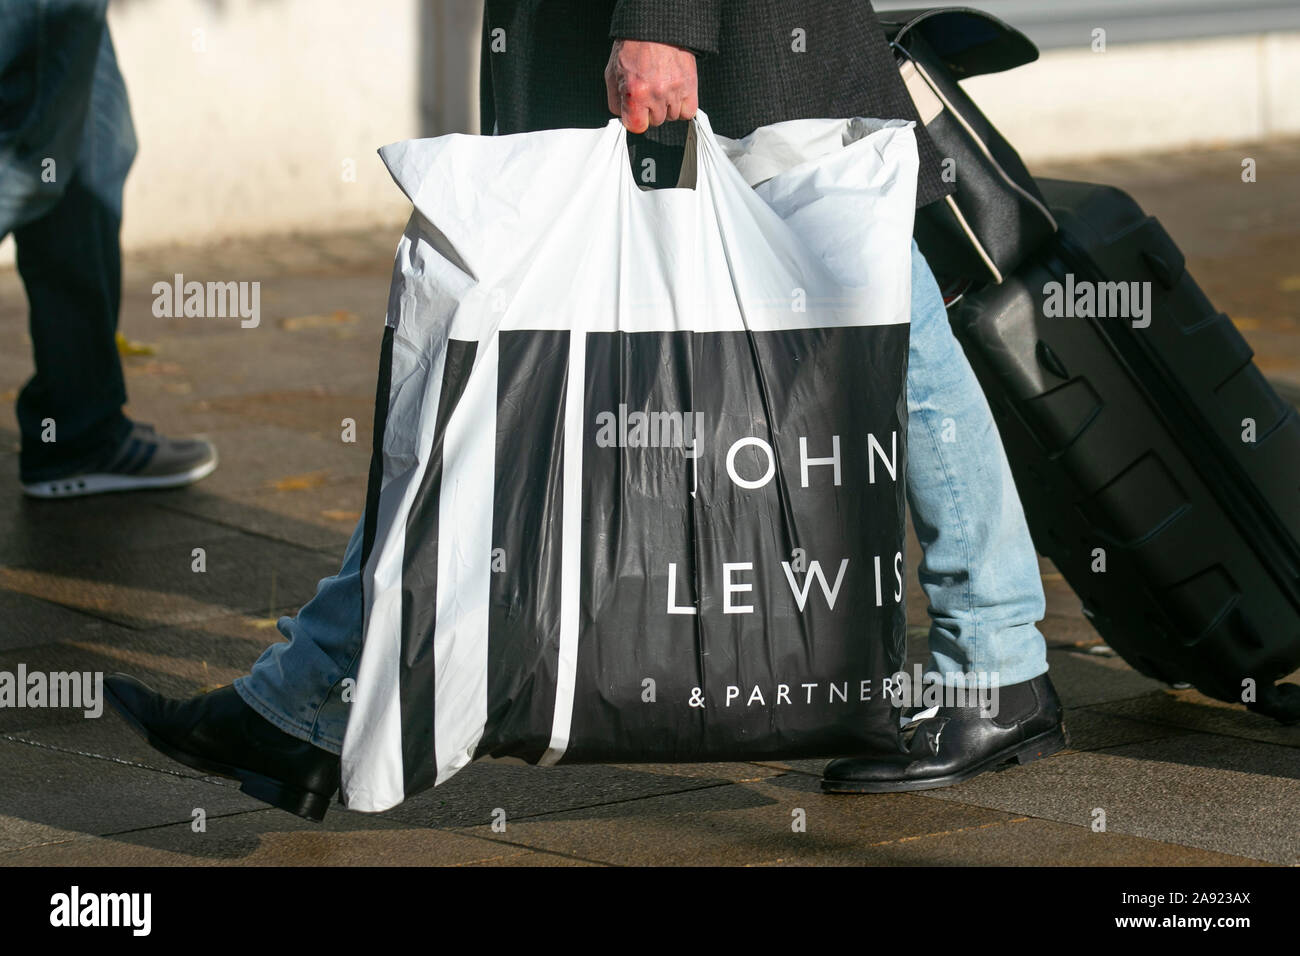 Jutexpo & John Lewis collaborate on bags made of recycled plastic bottles -  The Business Magazine